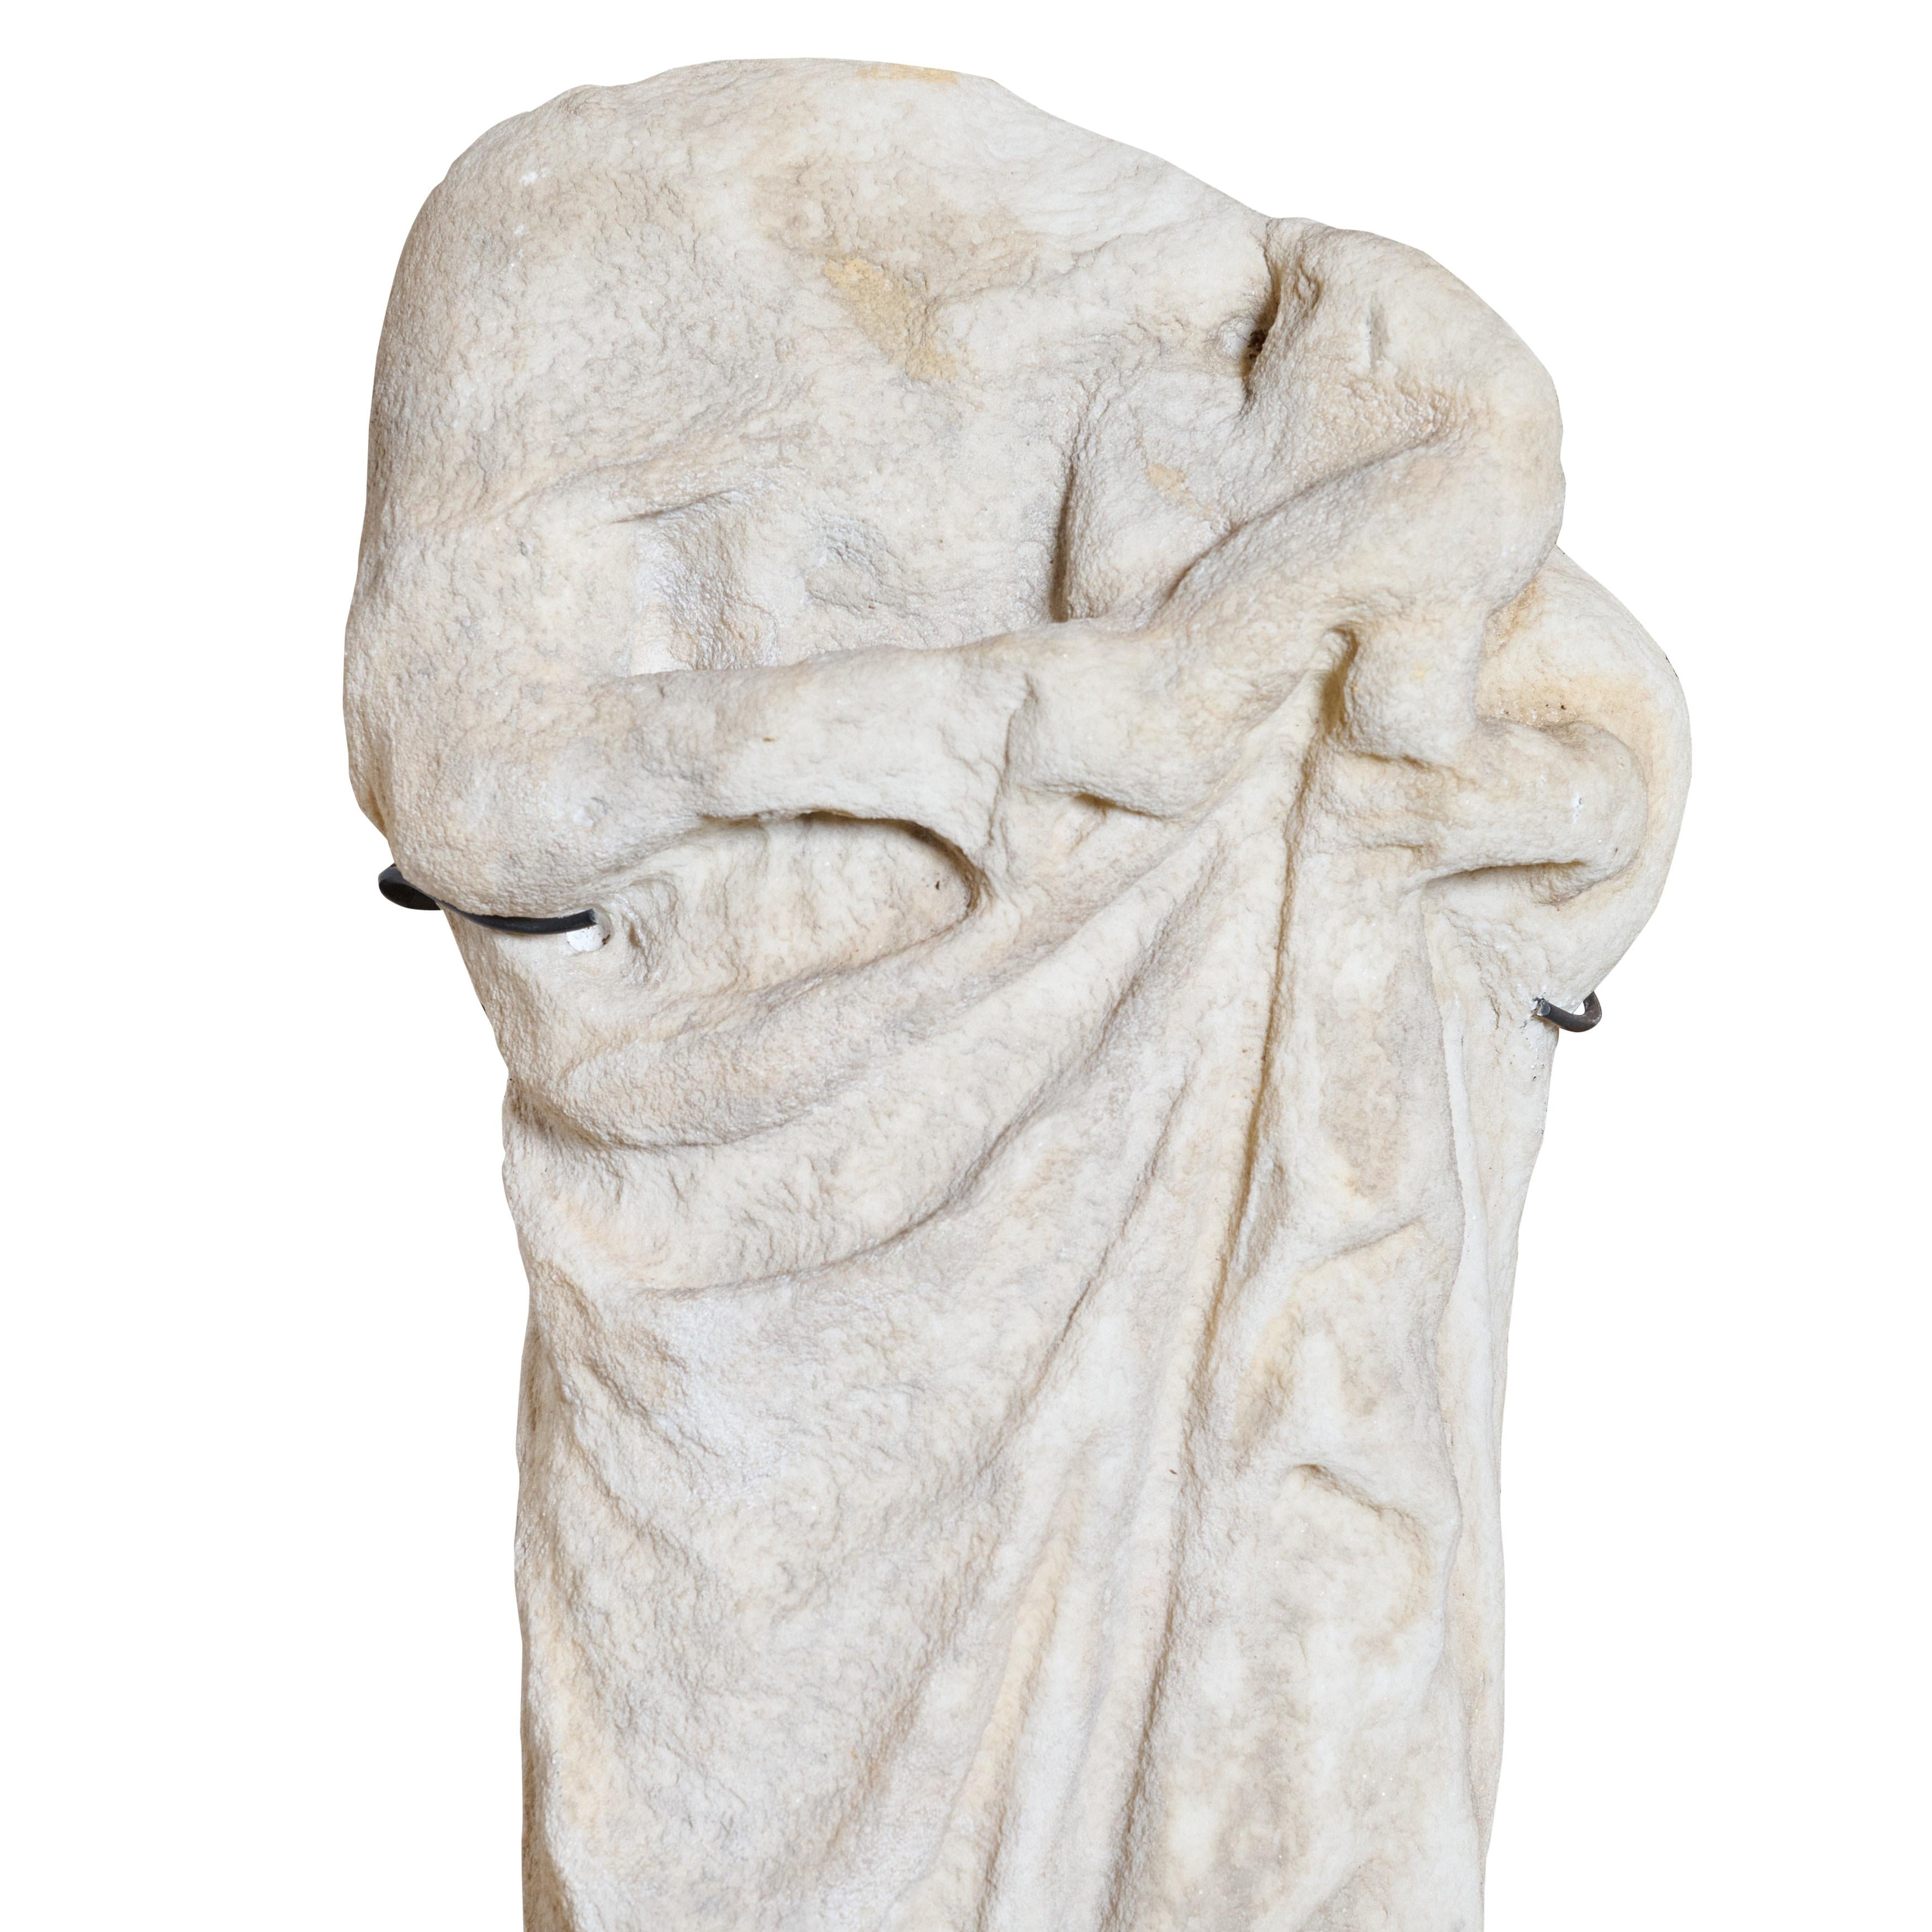 Ancient Roman marble sculpture. Includes custom iron stand. This is the real thing!